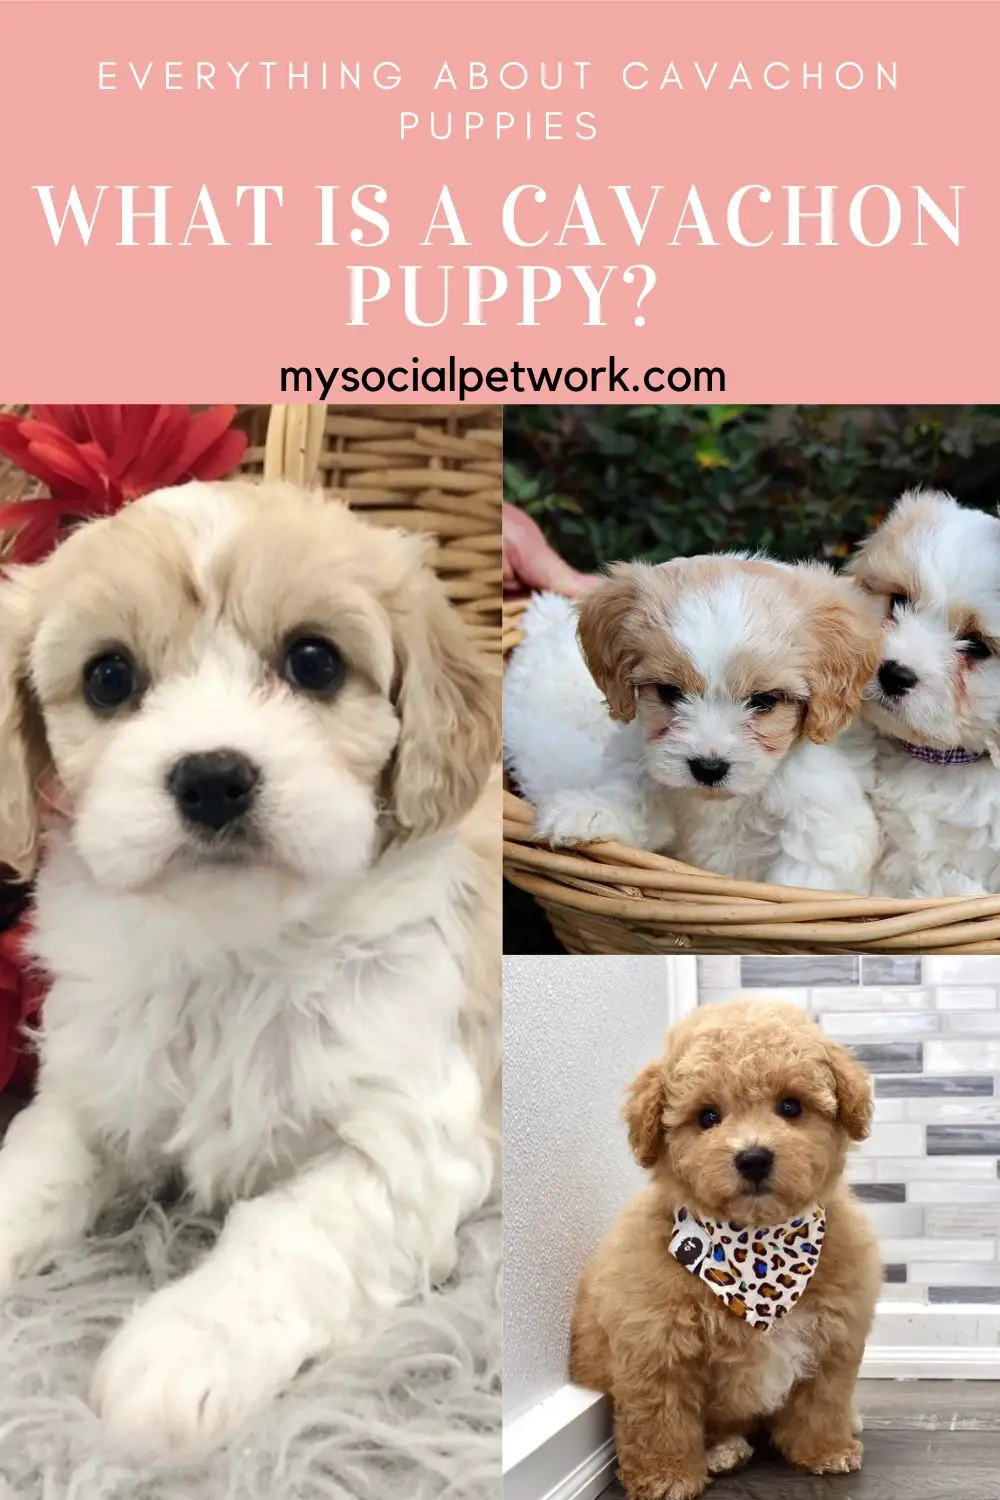 everything-about-cavachon-puppies-1-2651873